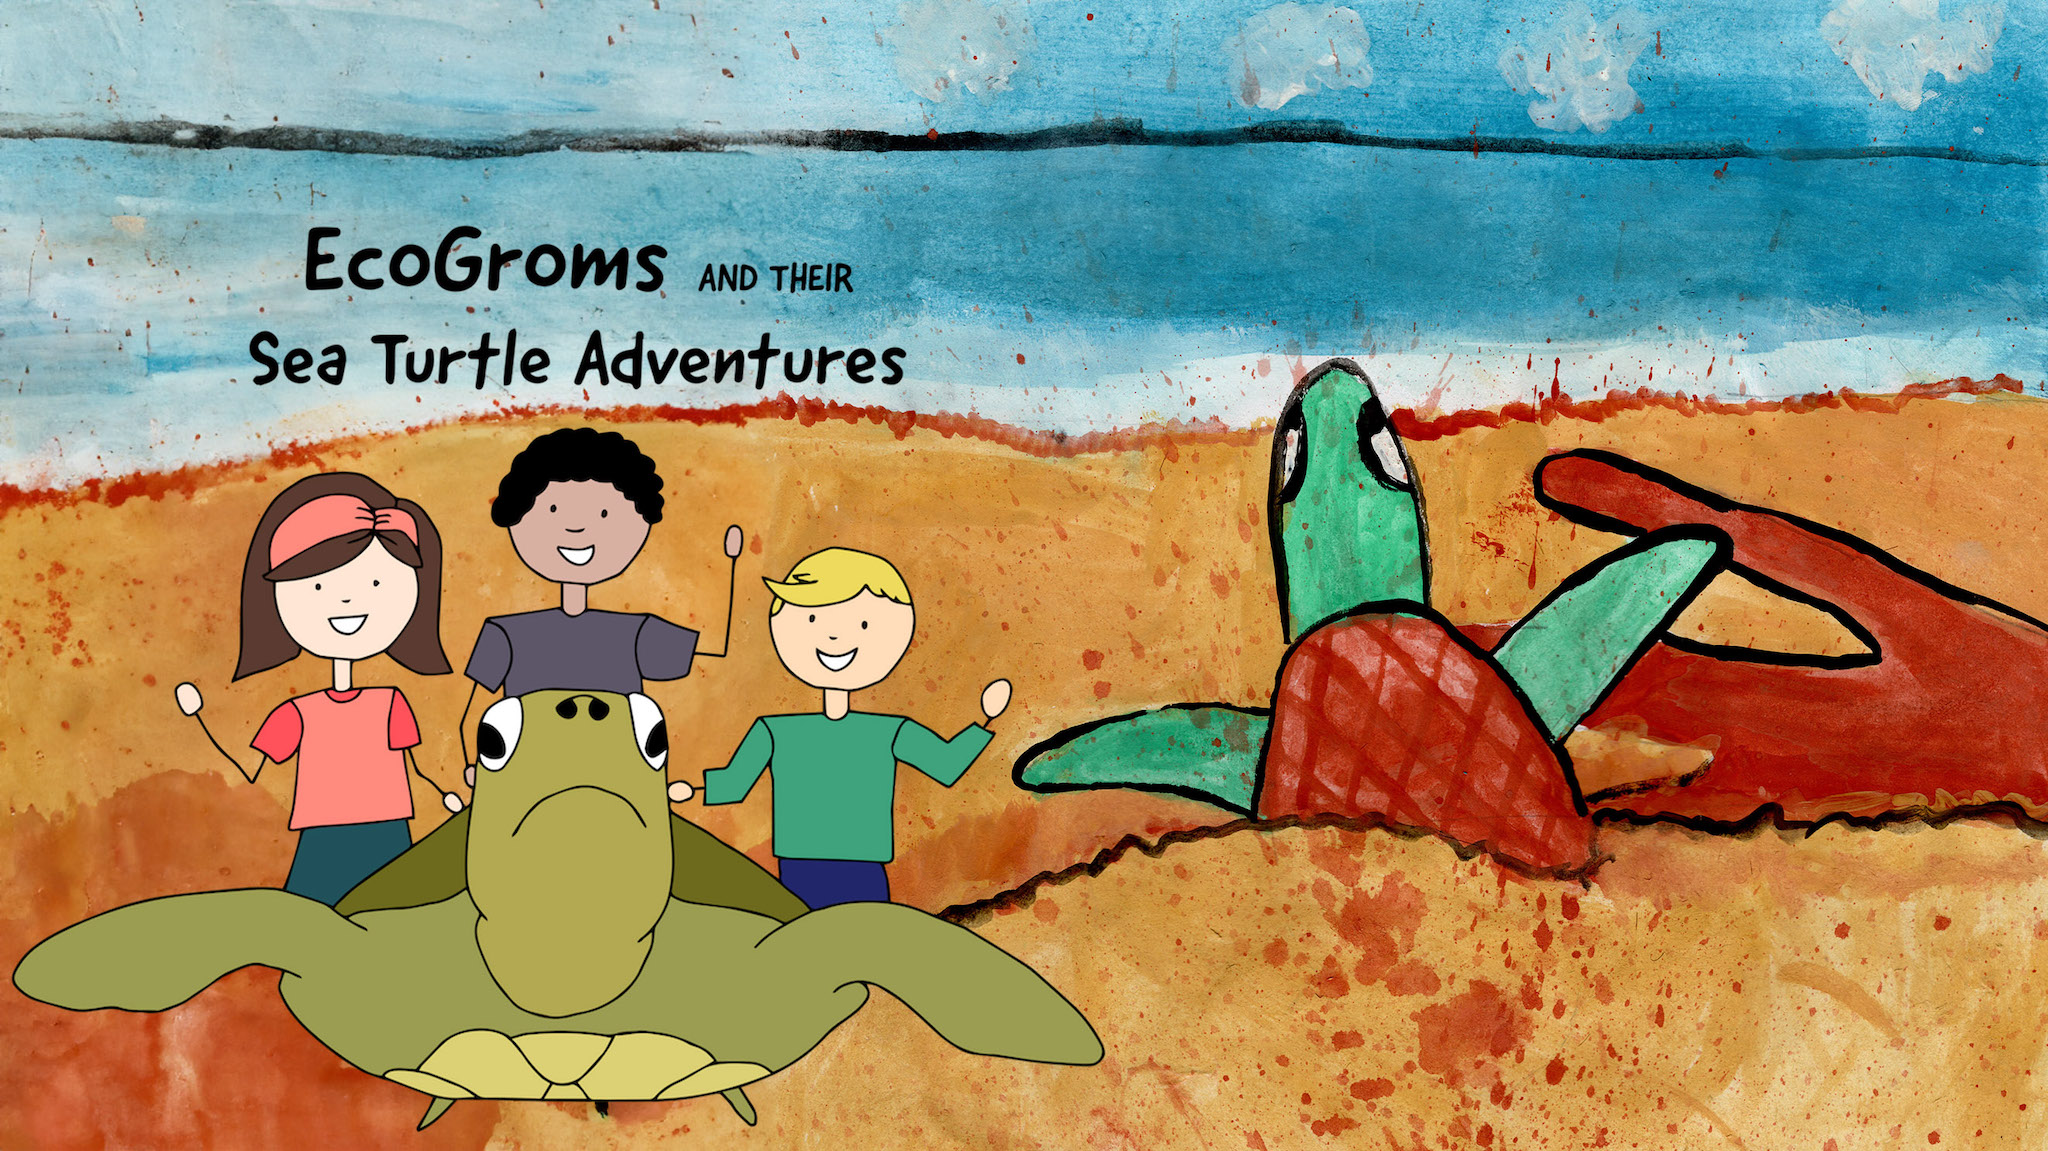 EcoGroms and their Sea Turtle Adventures